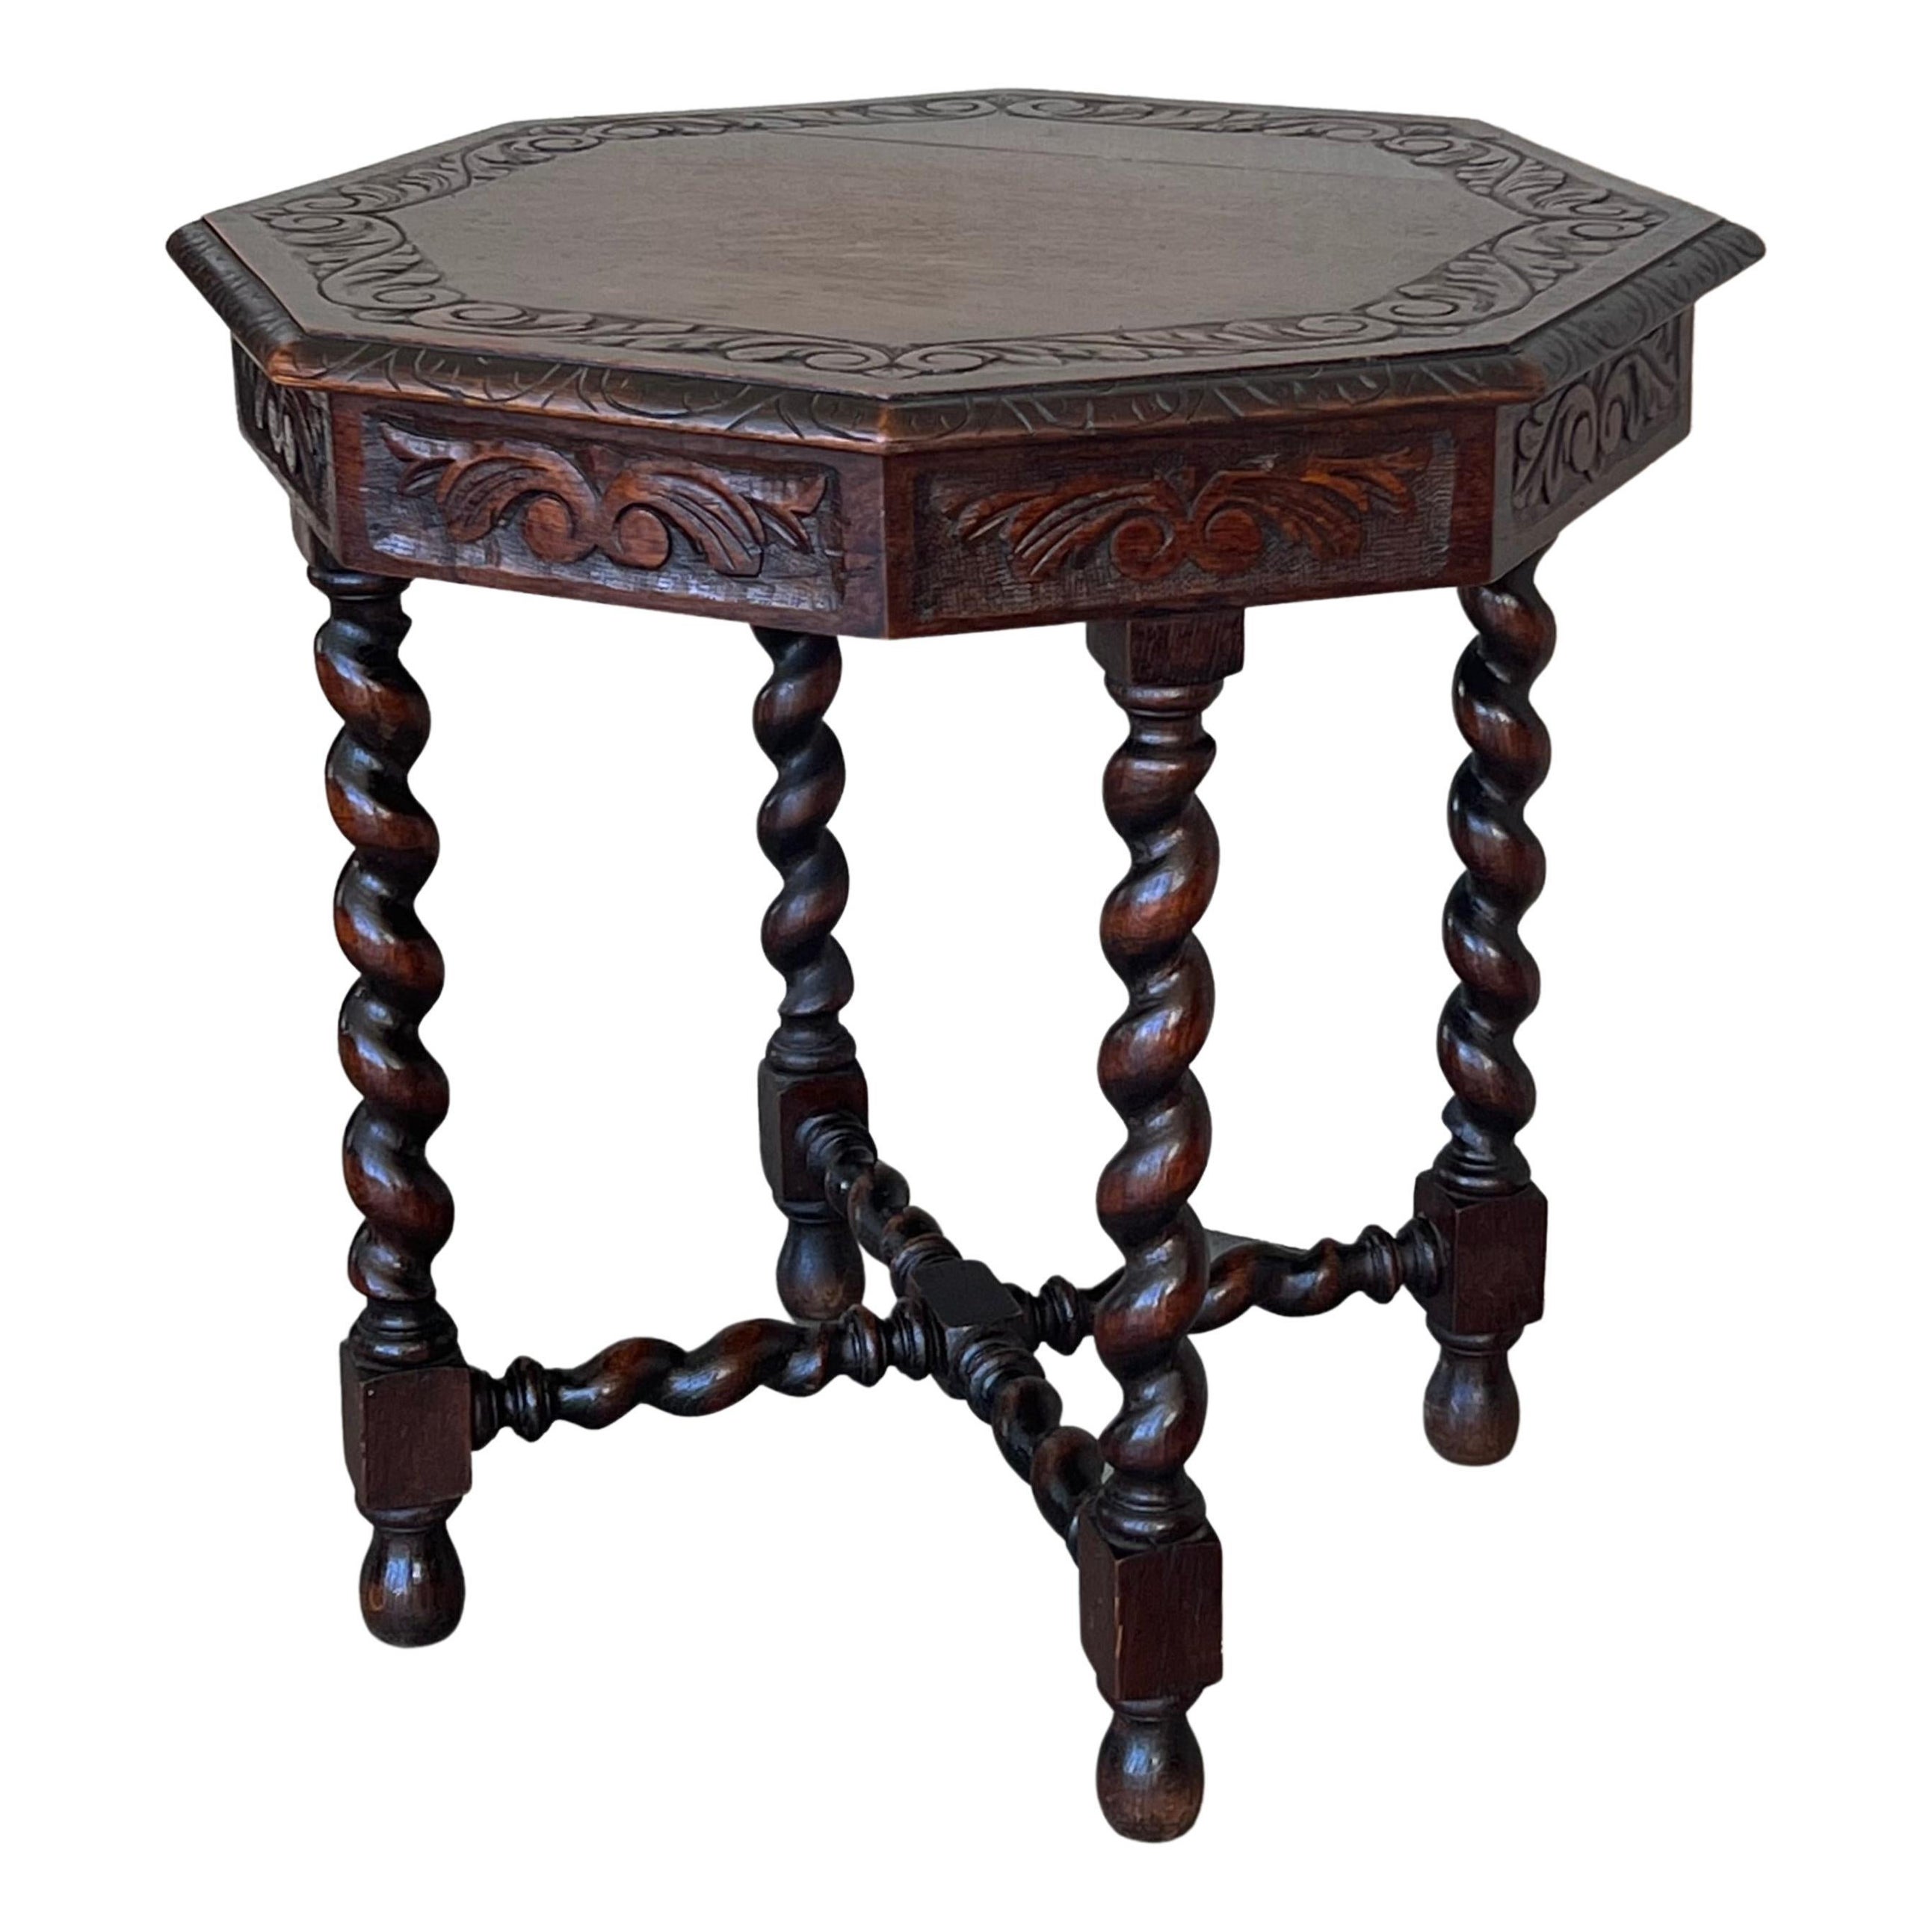 Antique Hexagonal Side or Center Walnut Table with Six Carved Legs